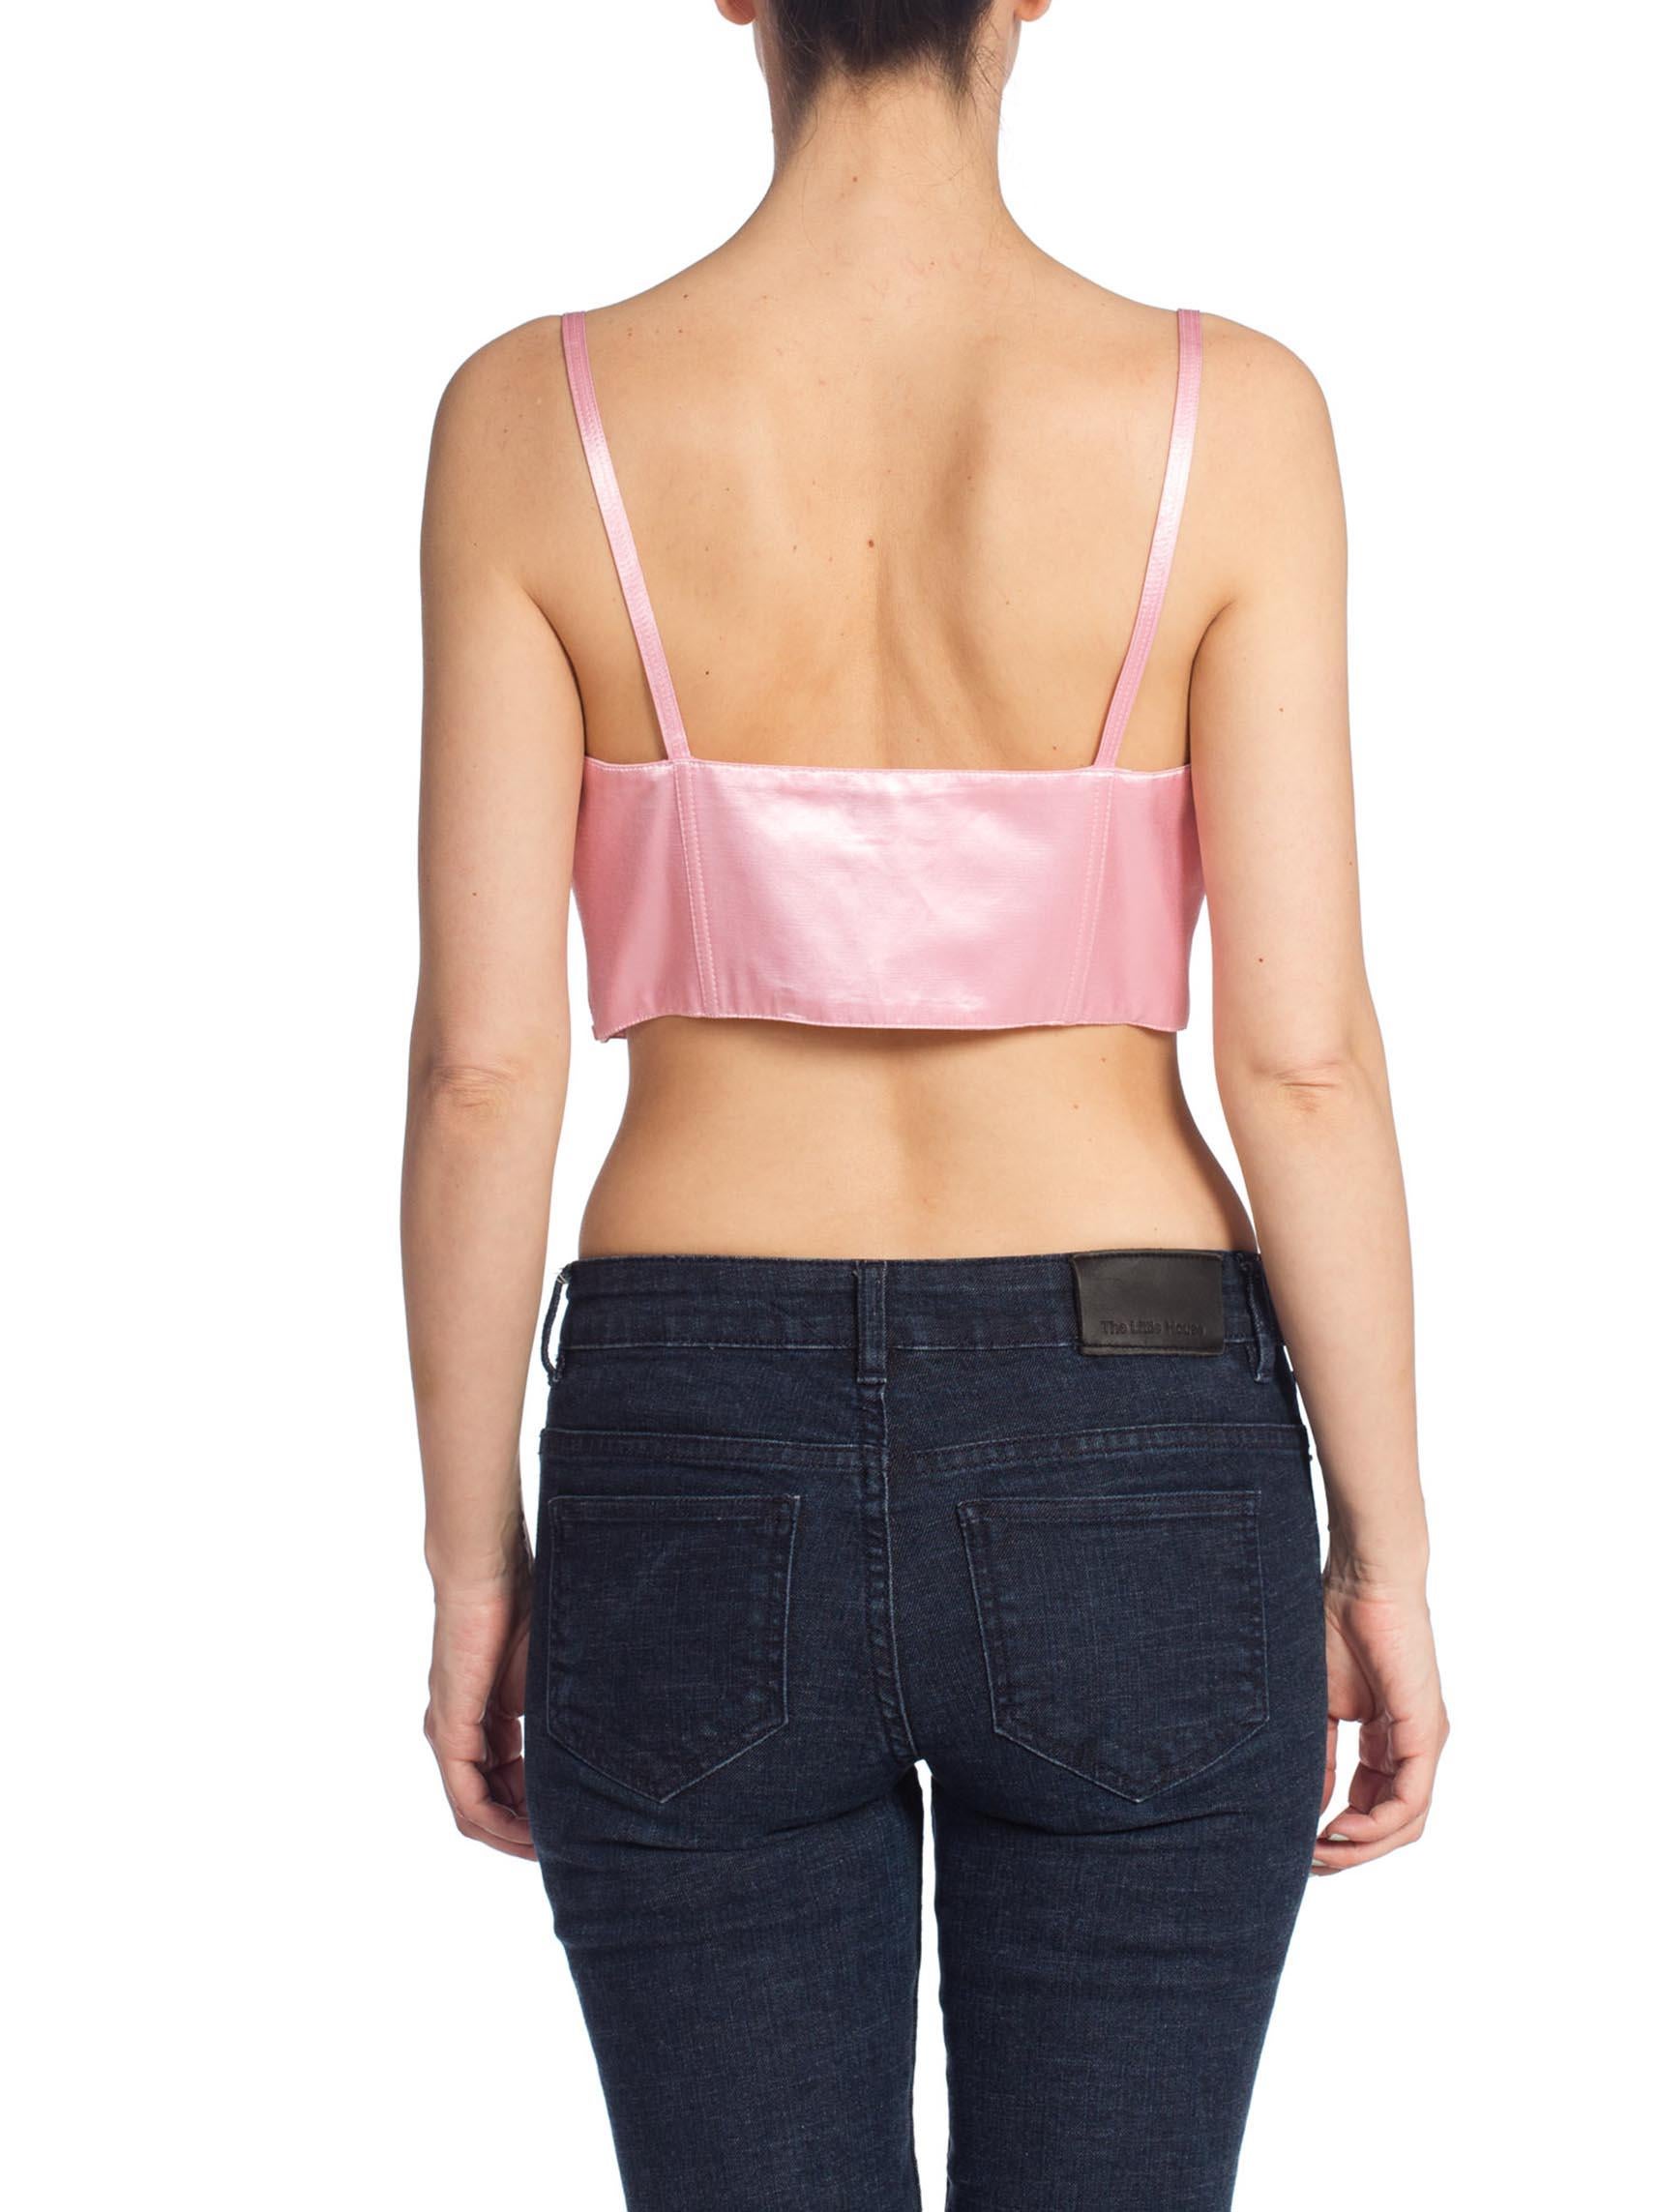 1990'S GIANNI VERSACE Baby Pink Satin Bra Top Buster Bustier In Excellent Condition For Sale In New York, NY